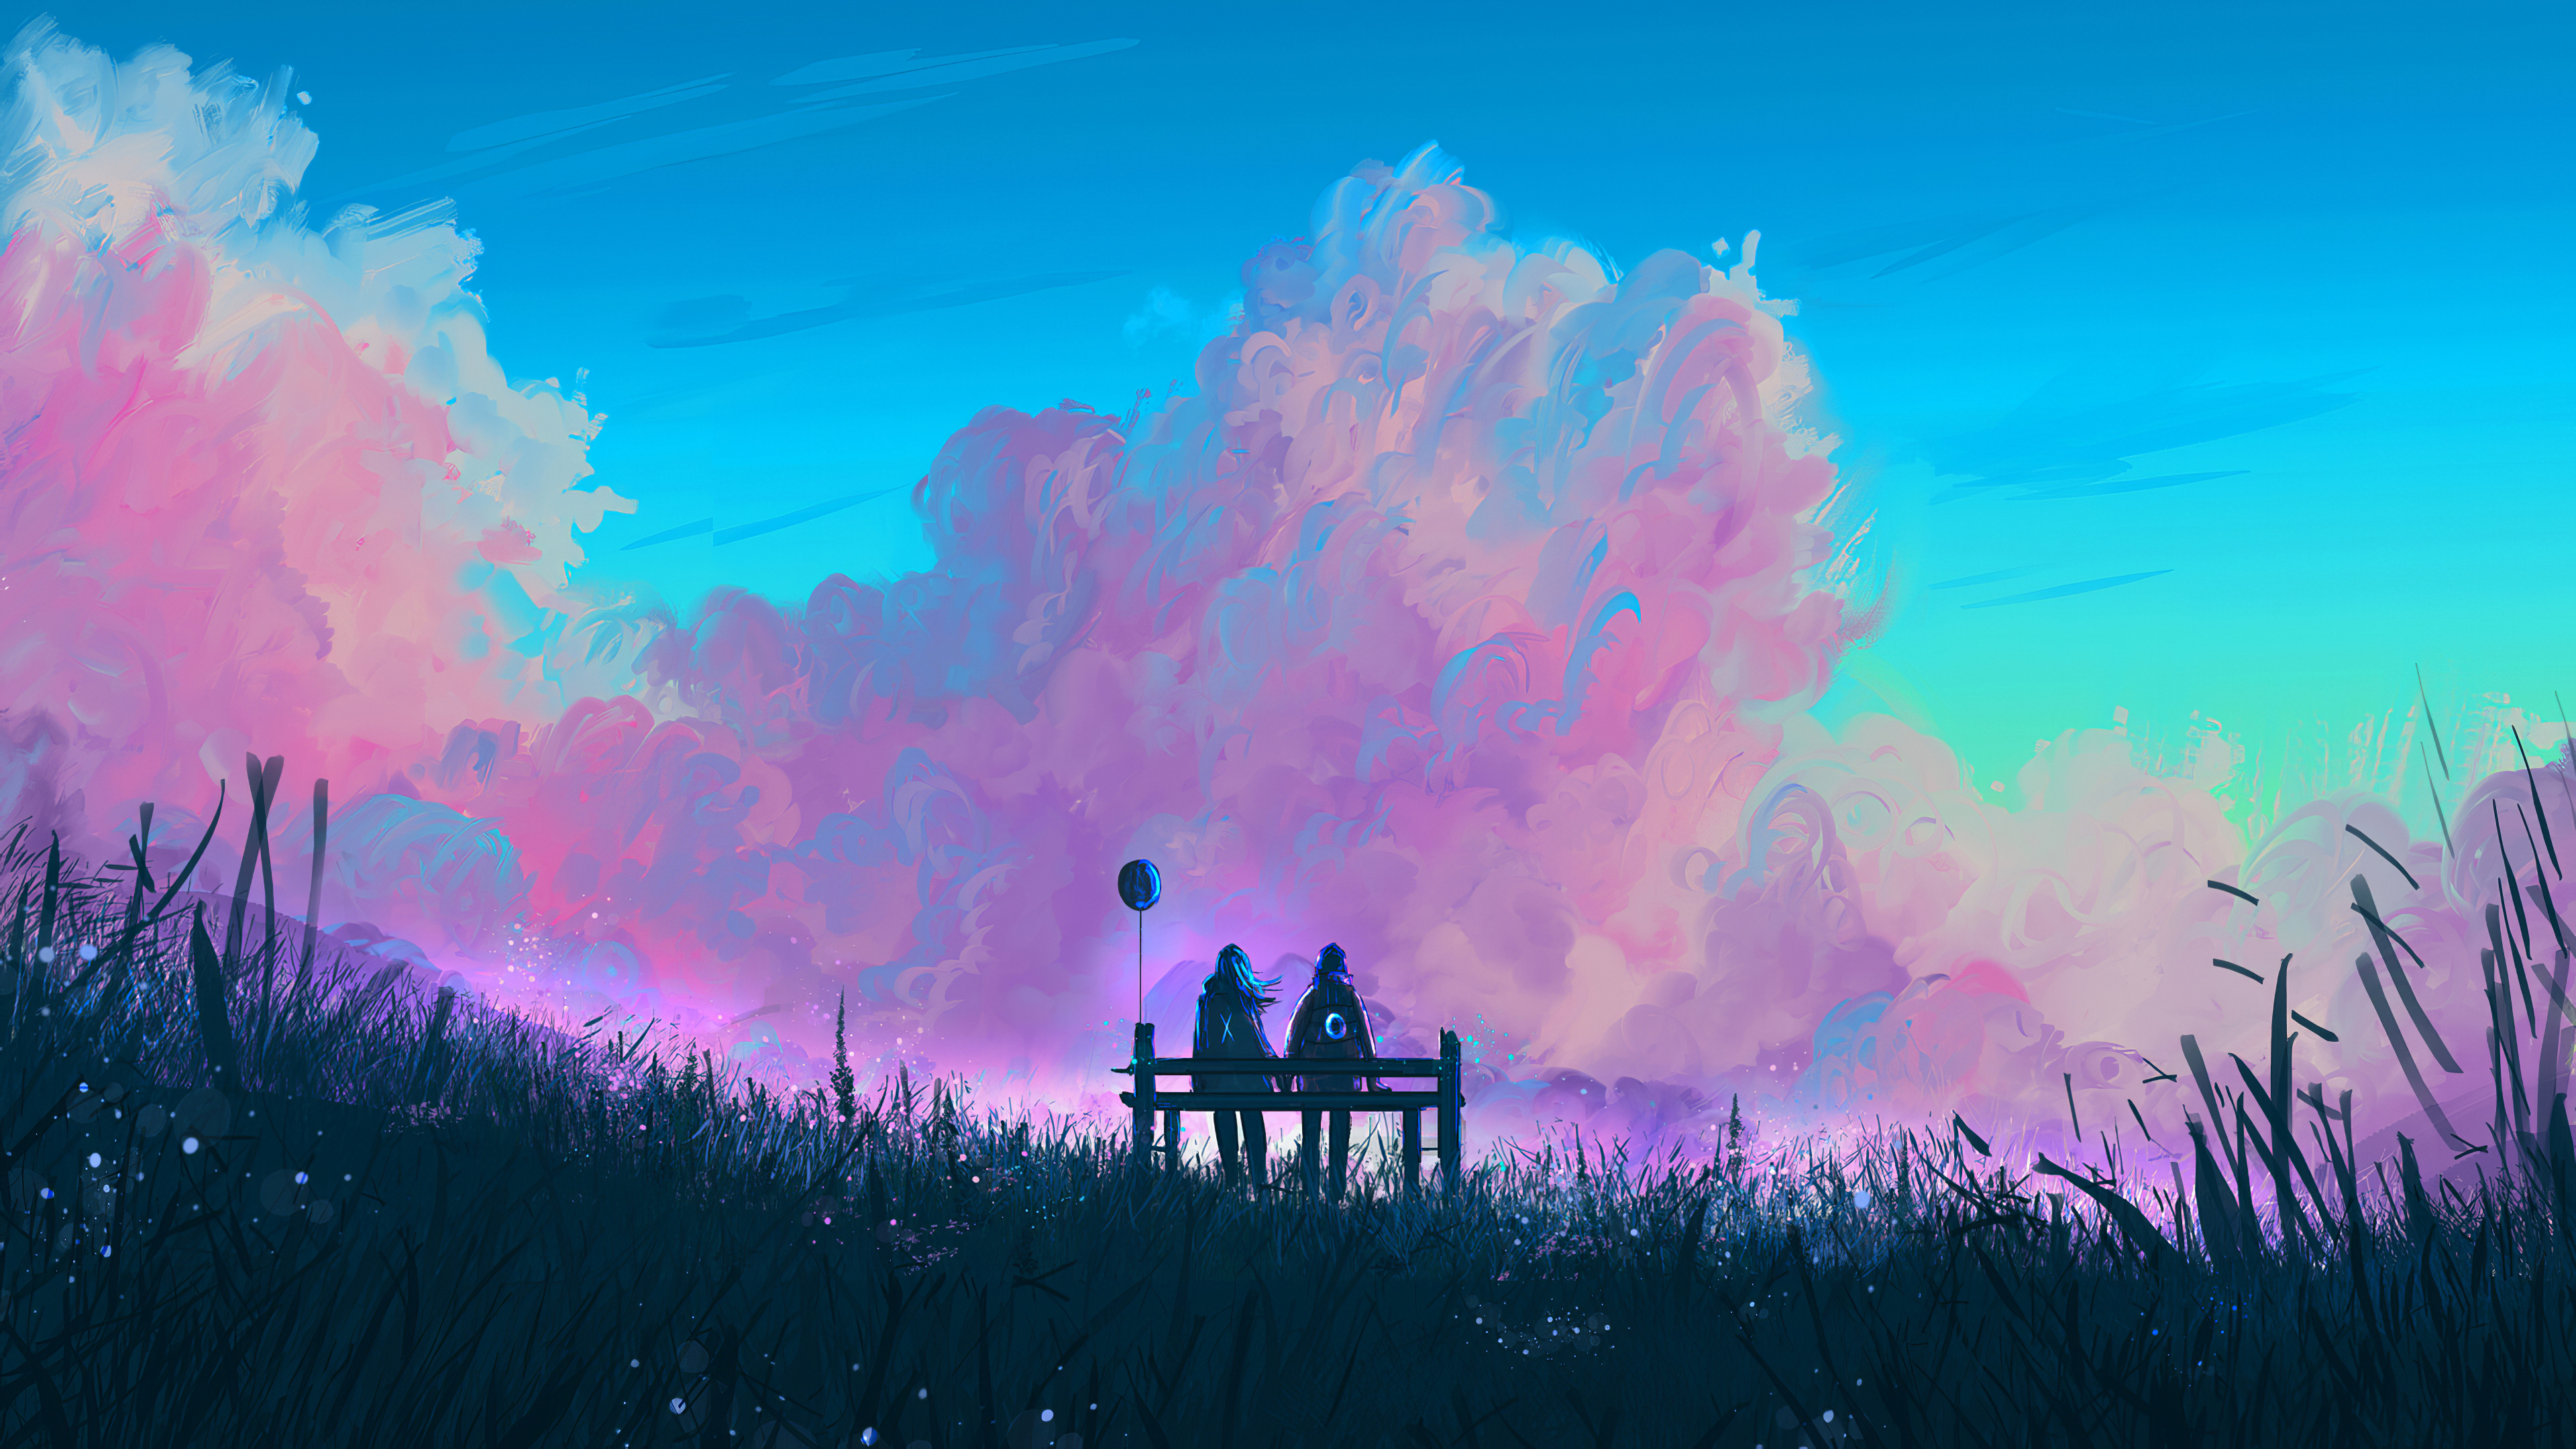 General 3840x2160 digital art artwork illustration landscape clouds pink digital painting nature sky skyscape people couple sitting grass environment concept art outdoors plants Nafay balloon bench Muhammad Nafay